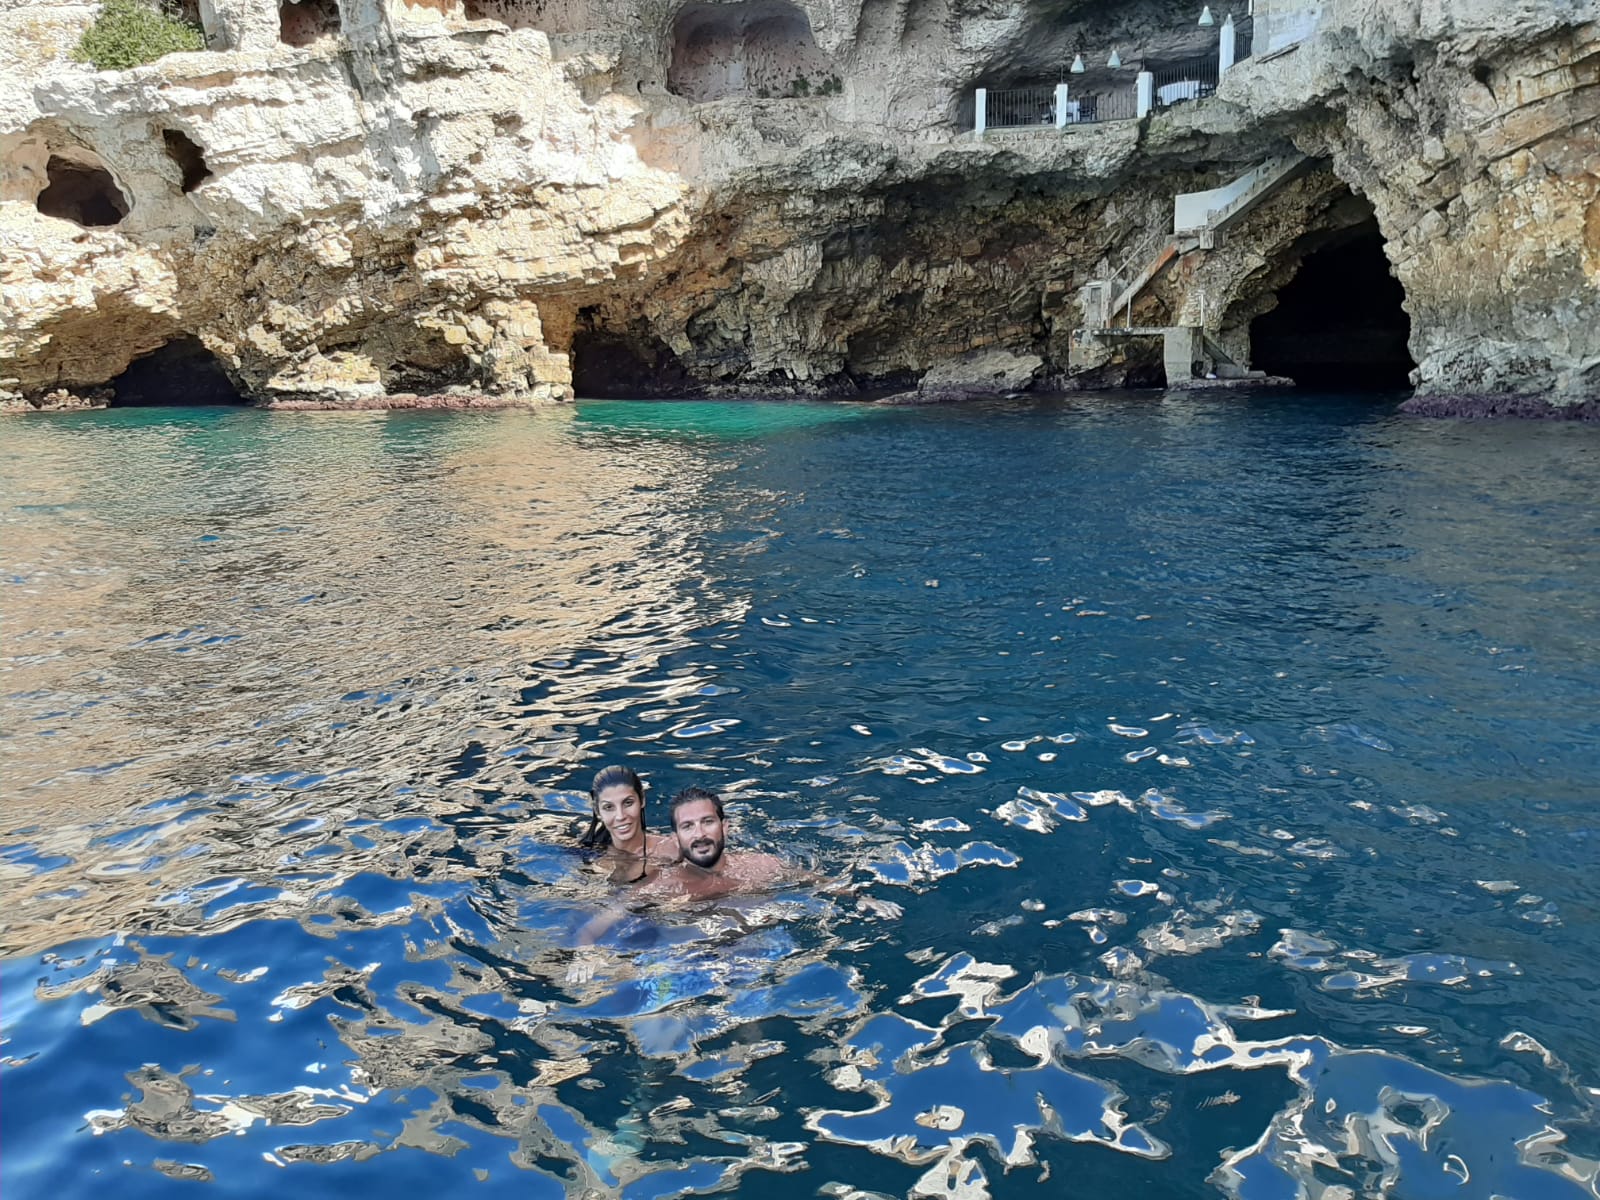 Cruise to the caves of Polignano a Mare